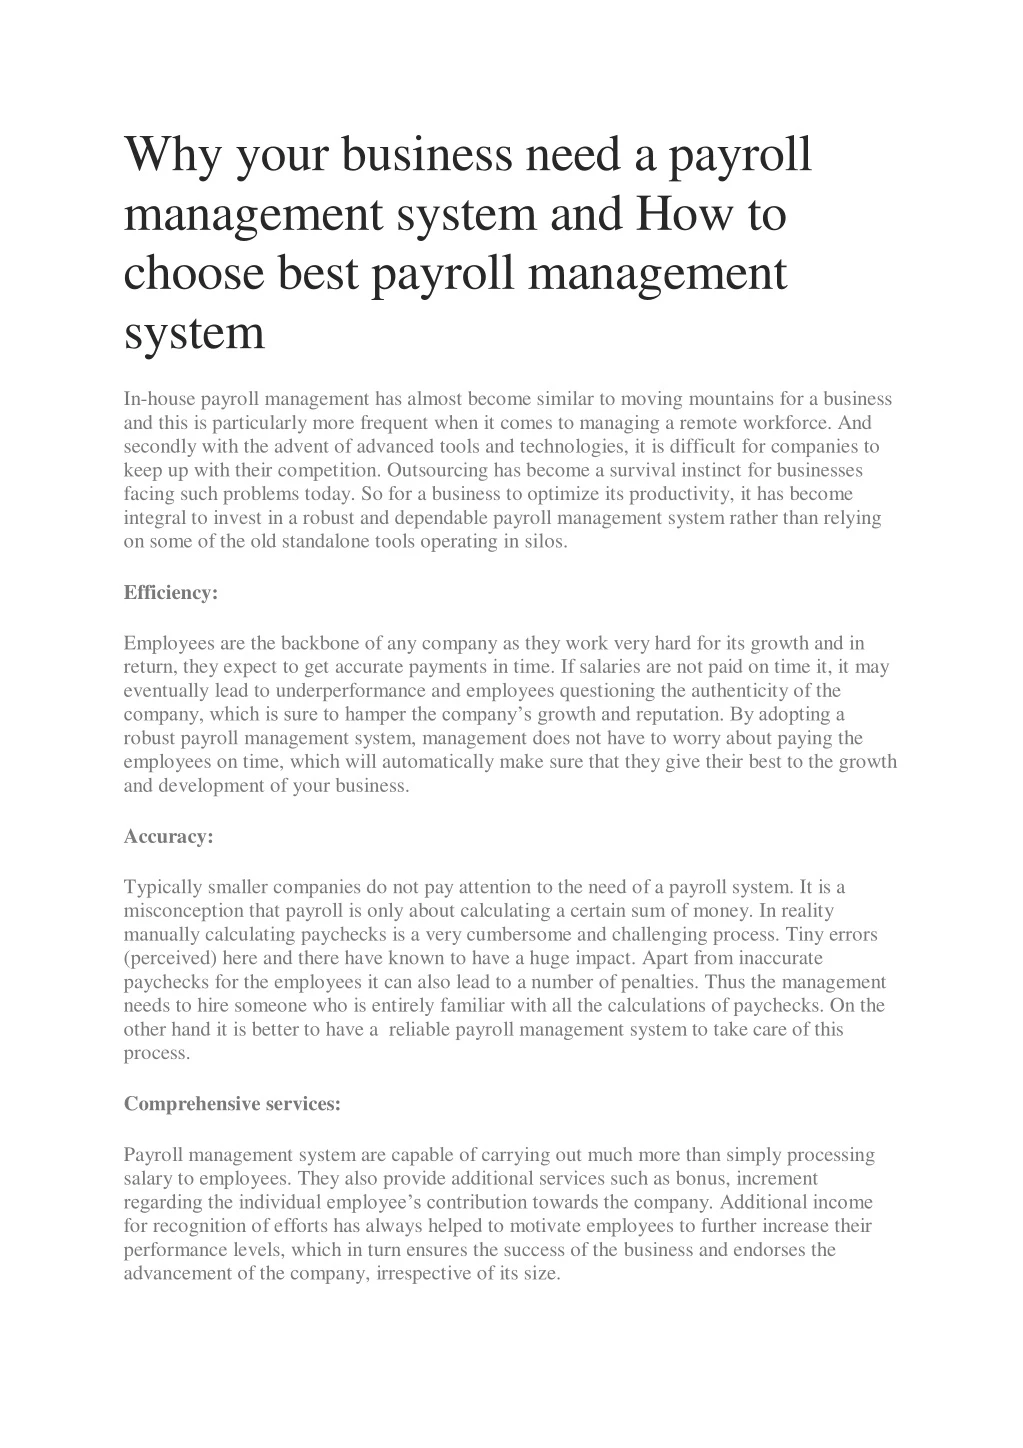 why your business need a payroll management